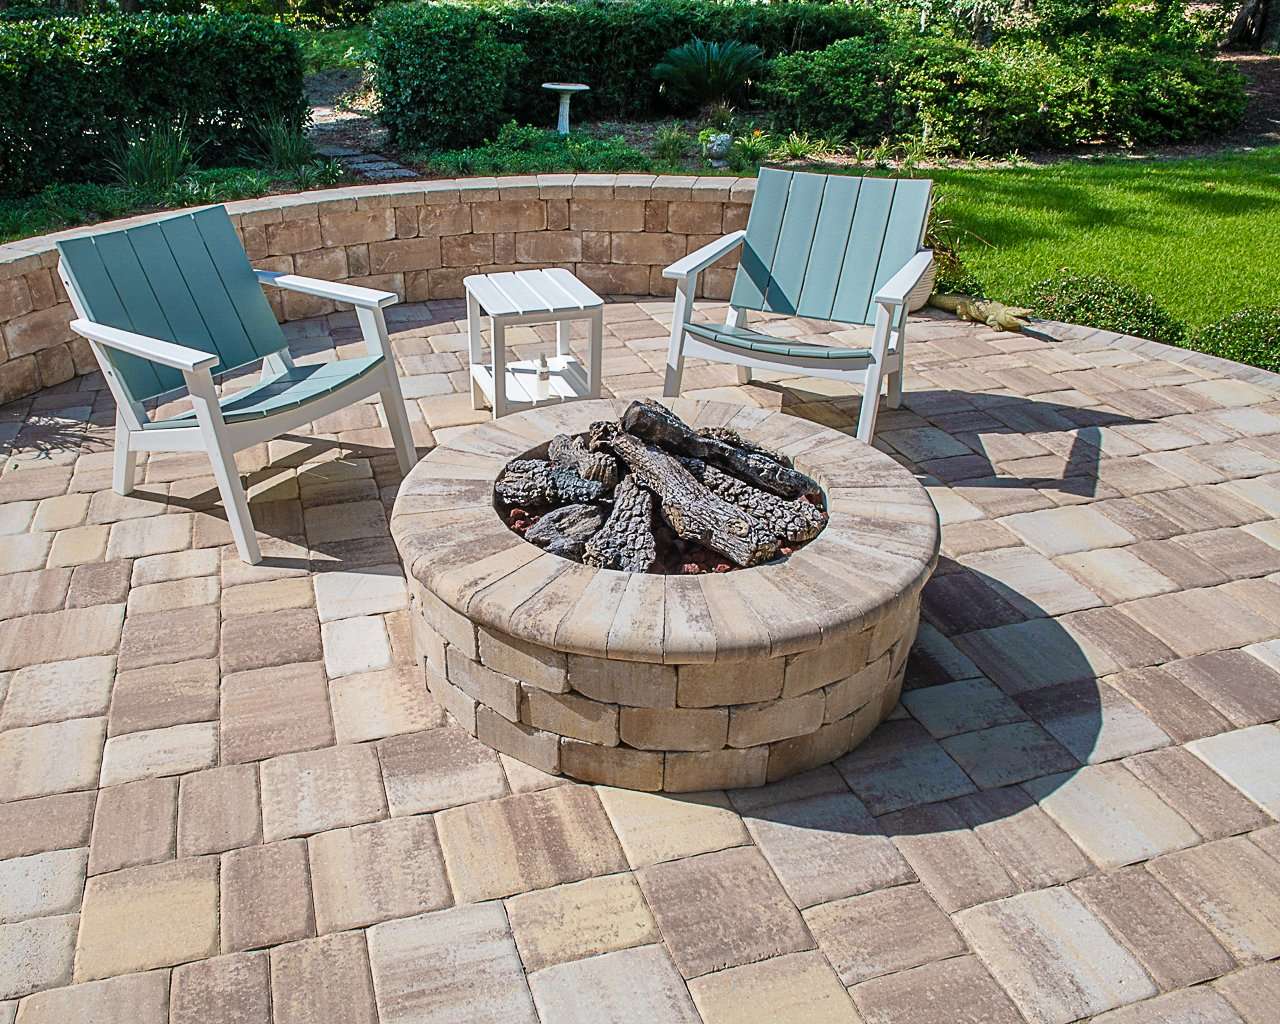 Build A Fire Pit Patio With Pavers, How To Build A Fire Pit On Patio Pavers